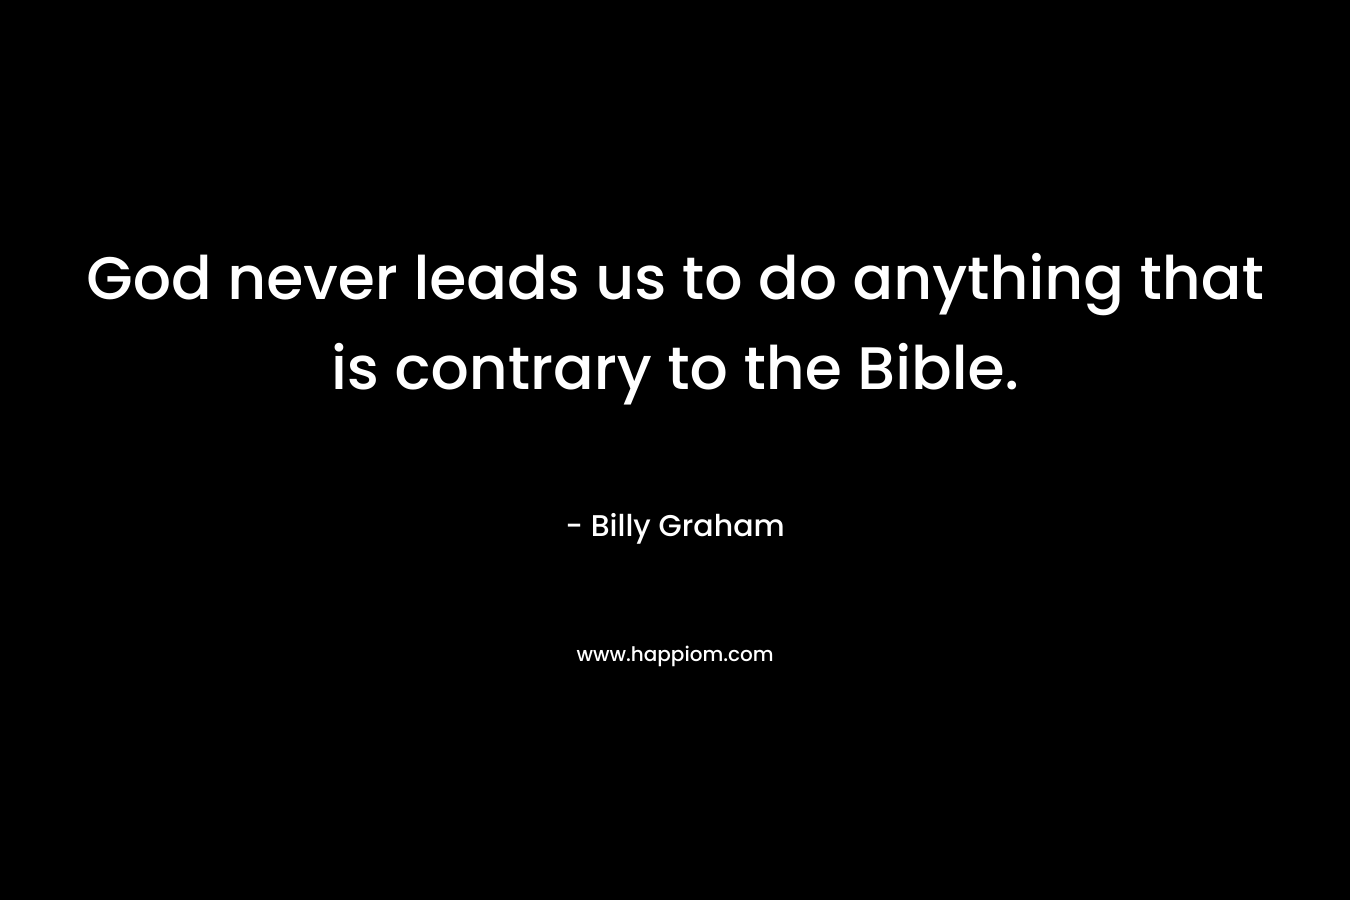 God never leads us to do anything that is contrary to the Bible.